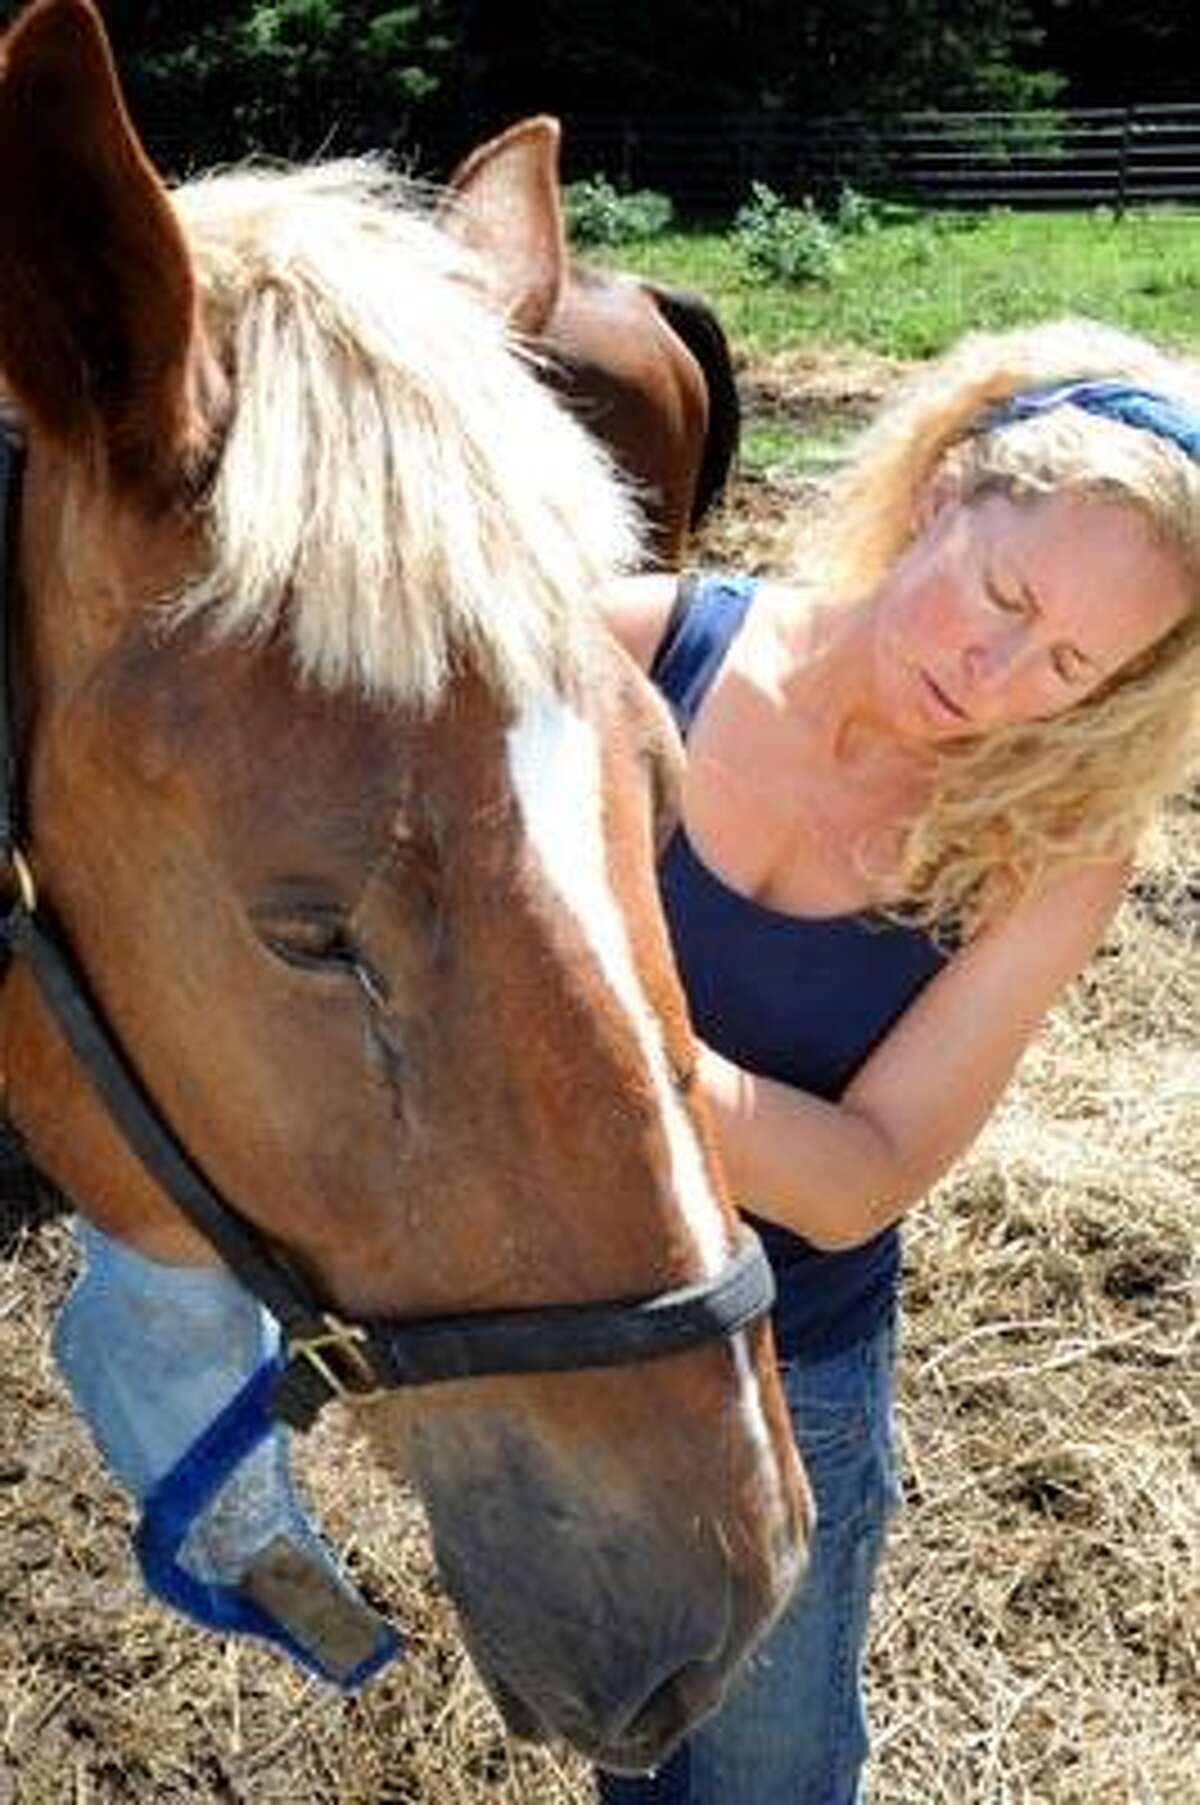 Kathleen Schurman owner of Locket's Meadow Farm with "Trigger" showing the goop coming from the horses eyes due to pneumonia. Schurman was showing the four horses rescued from the slaughterhouse in Tenn and brought to CT all suffering from pneumonia. 7.26.2010 VM Williams